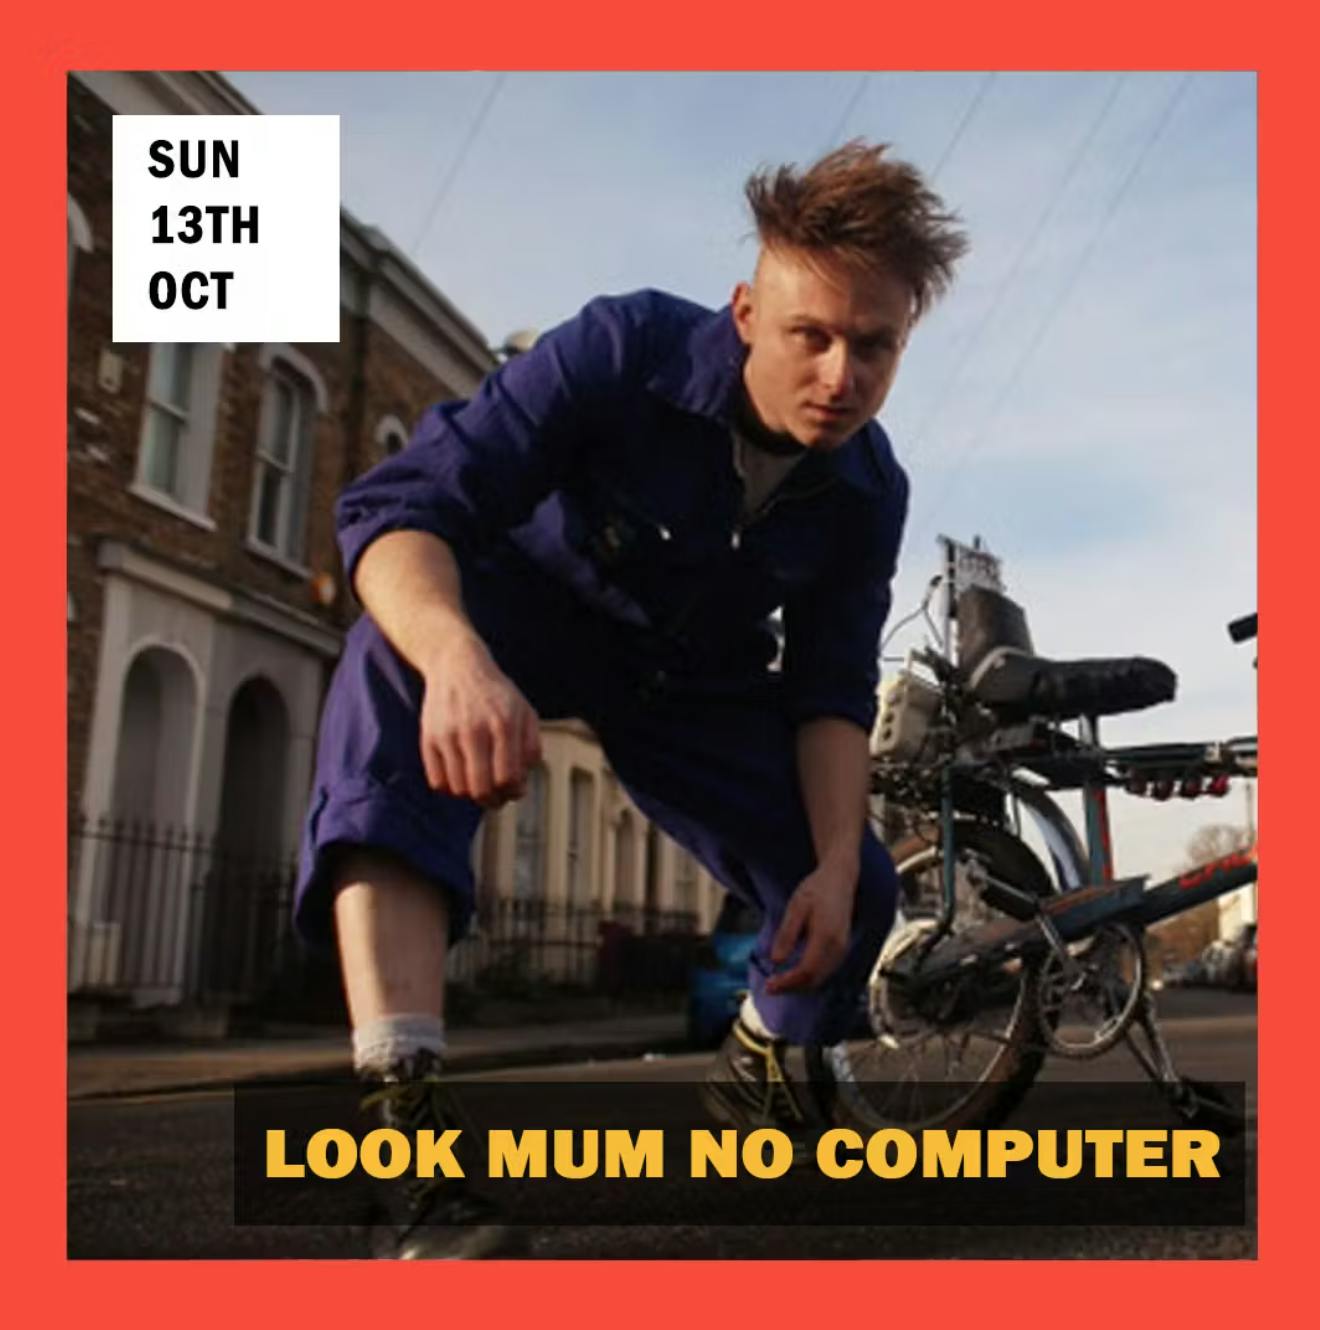 Stage times: Look Mum No Computer